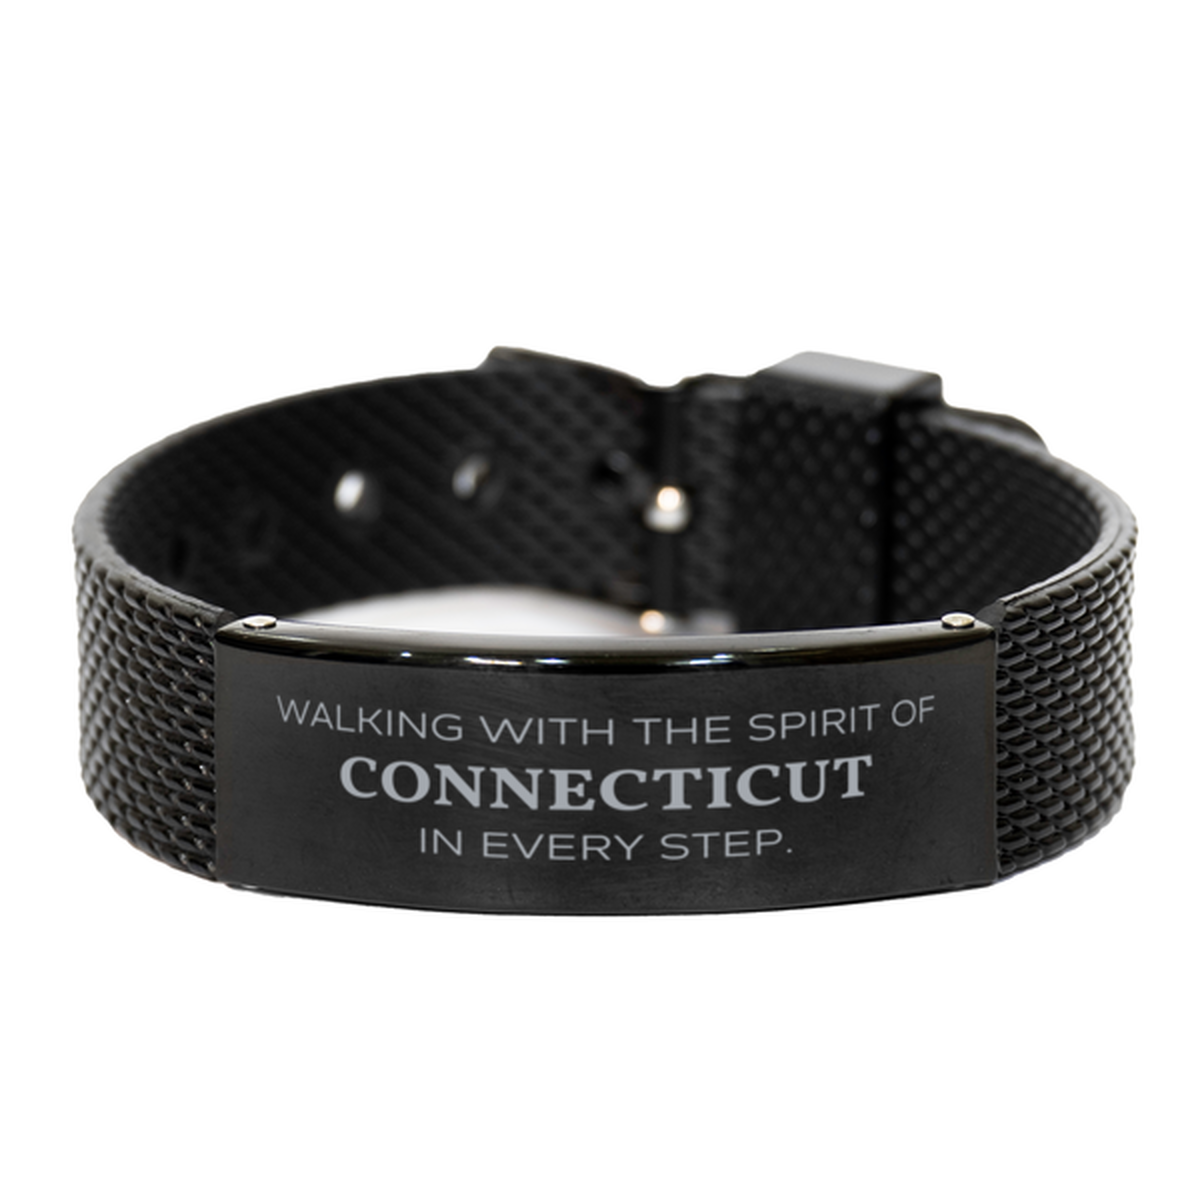 Connecticut Gifts, Walking with the spirit, Love Connecticut Birthday Christmas Black Shark Mesh Bracelet For Connecticut People, Men, Women, Friends